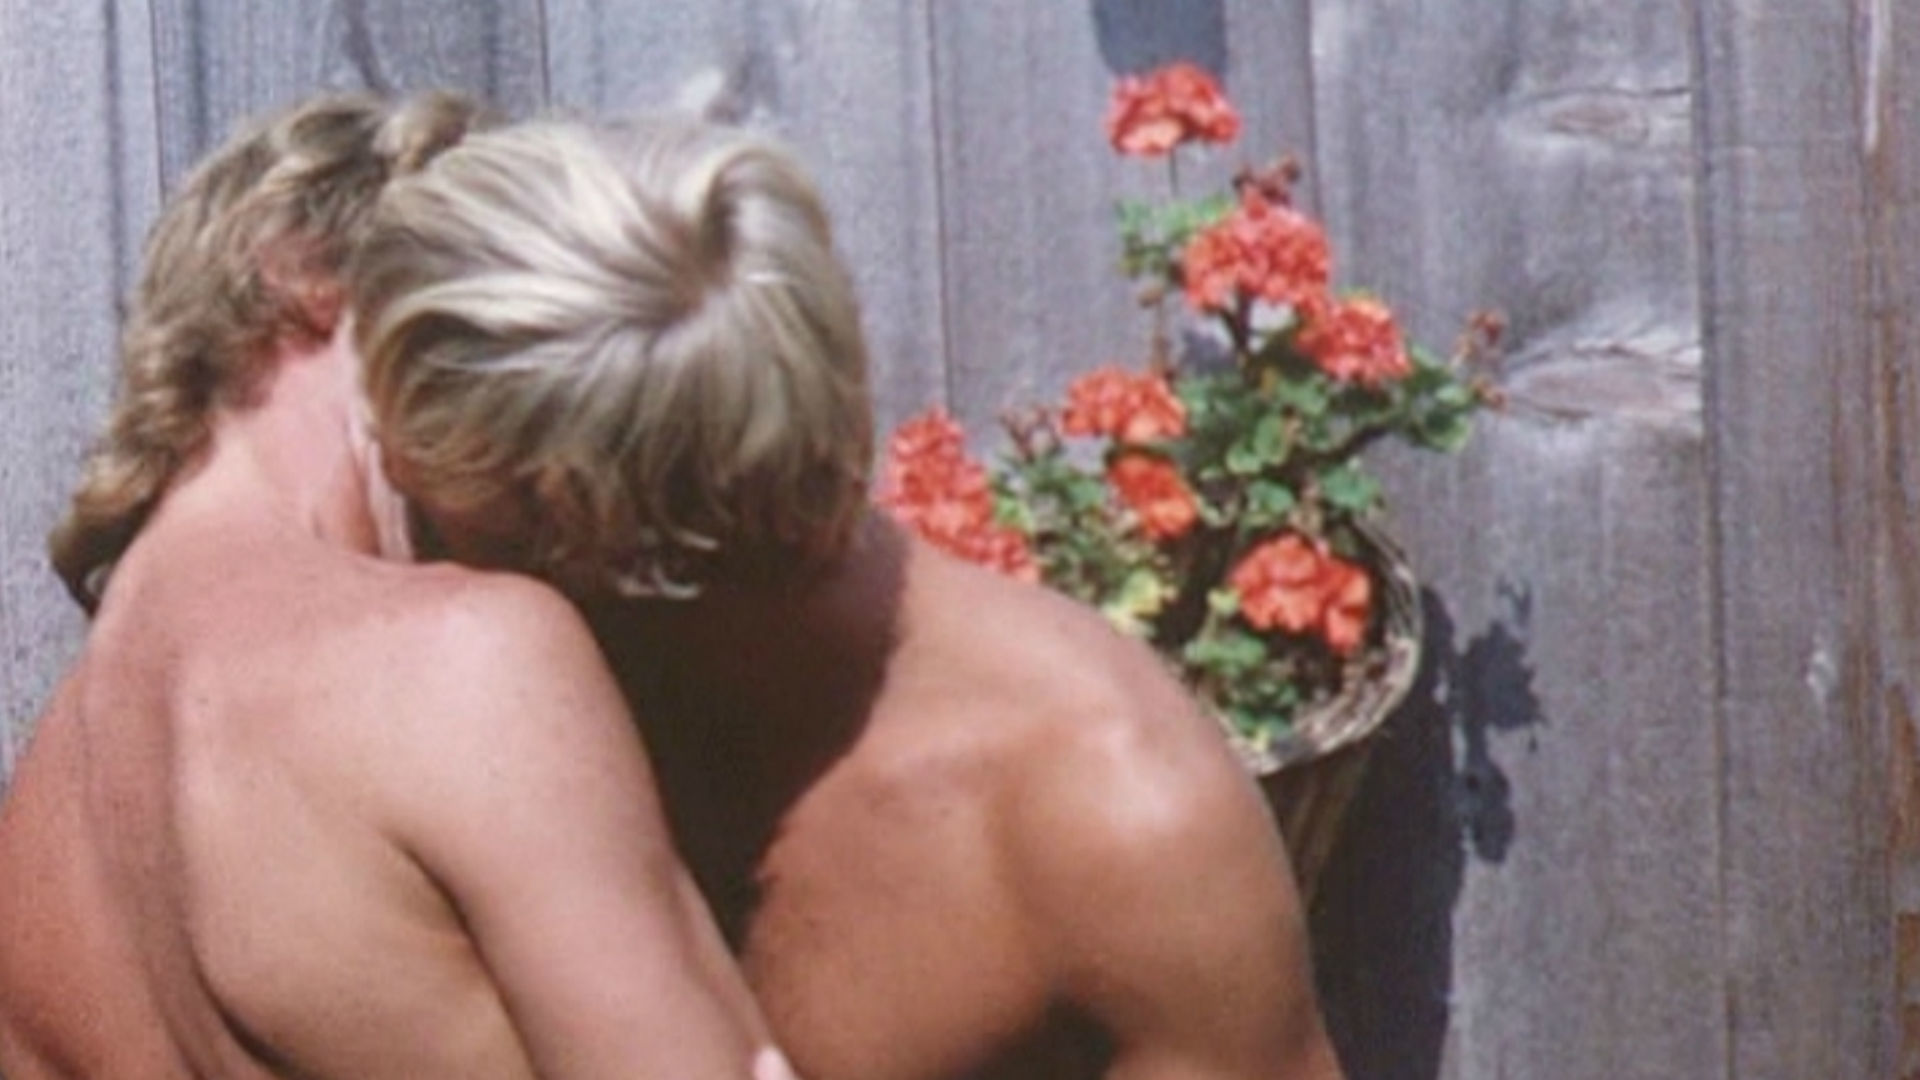 8mm Porn Gay - Watch Peter de Rome: Grandfather of Gay Porn online - BFI Player